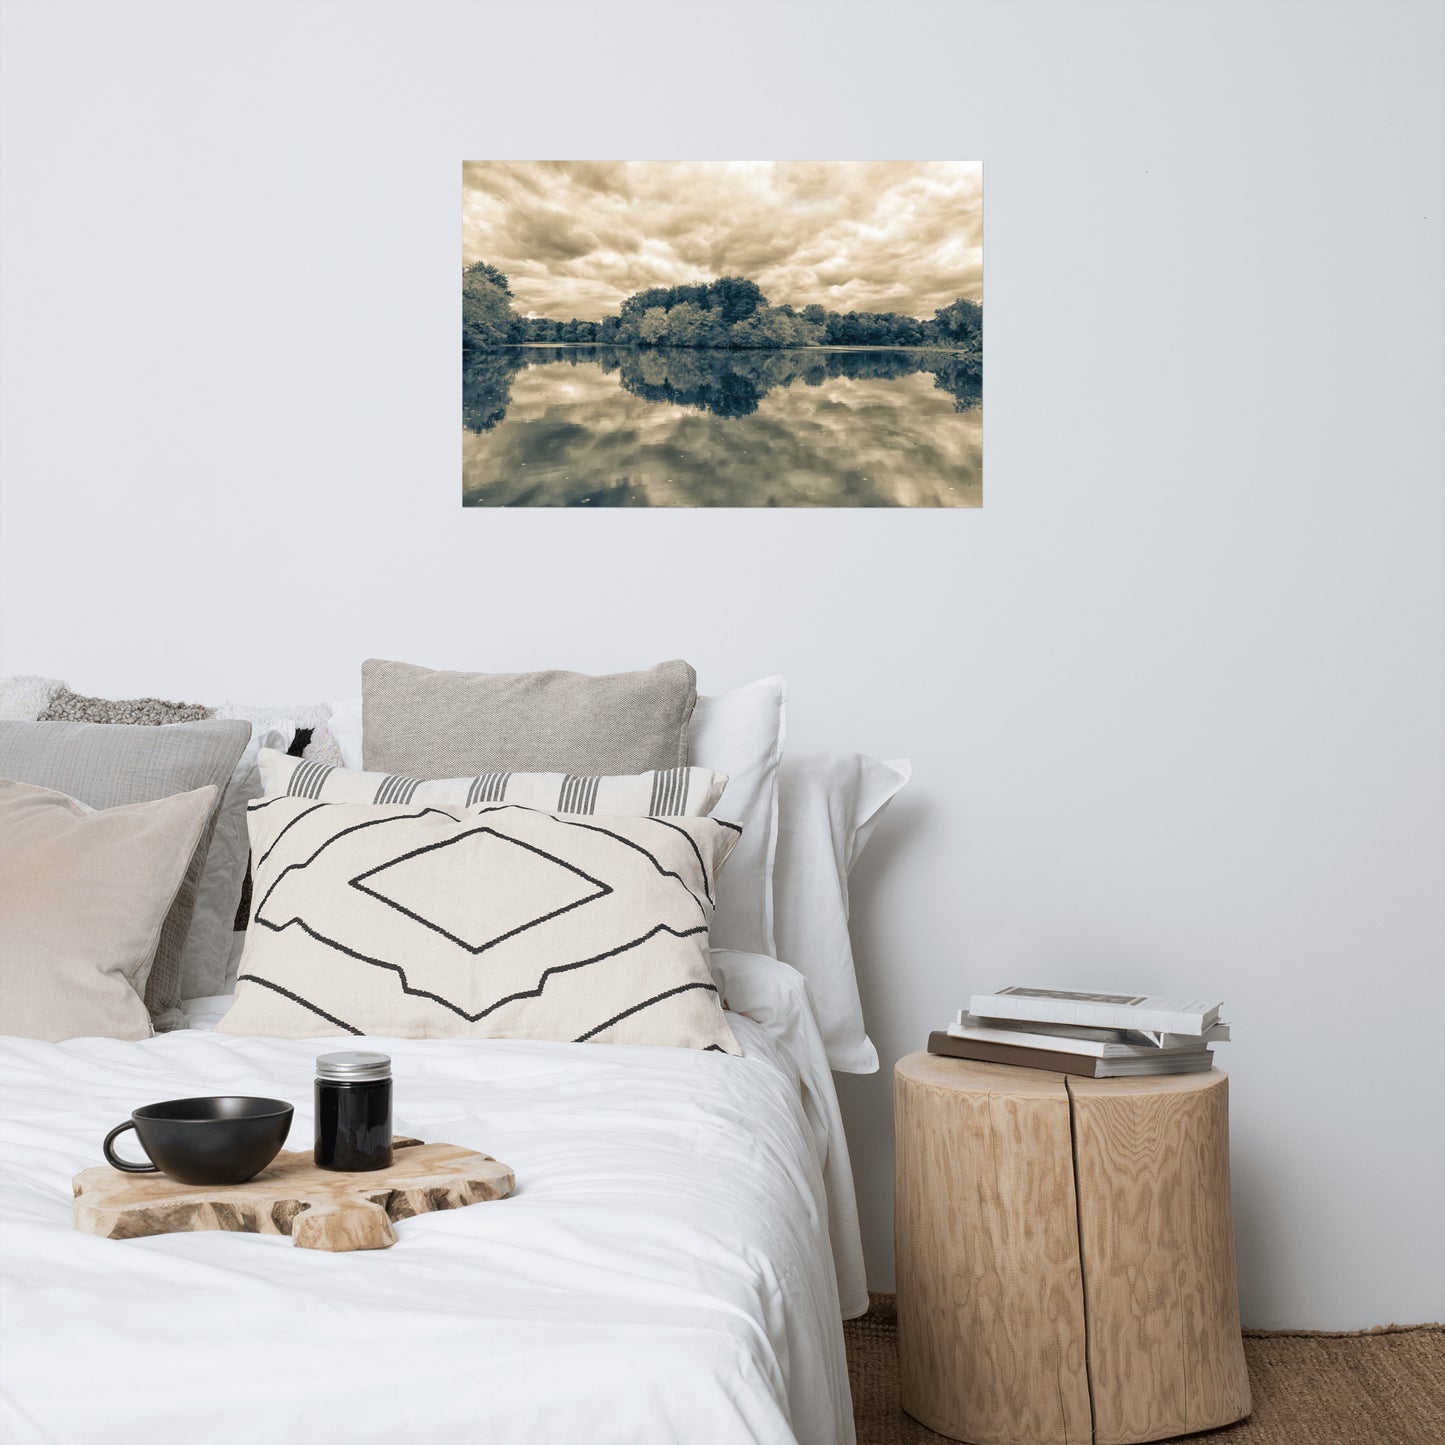 Unique Wall Art For Bedroom: Fall Trees on Edge of Pond With Stormy Sky Split Tone - Rural / Country Style Landscape / Nature Loose / Unframed / Frameless / Frameable Photograph Wall Art Print - Artwork